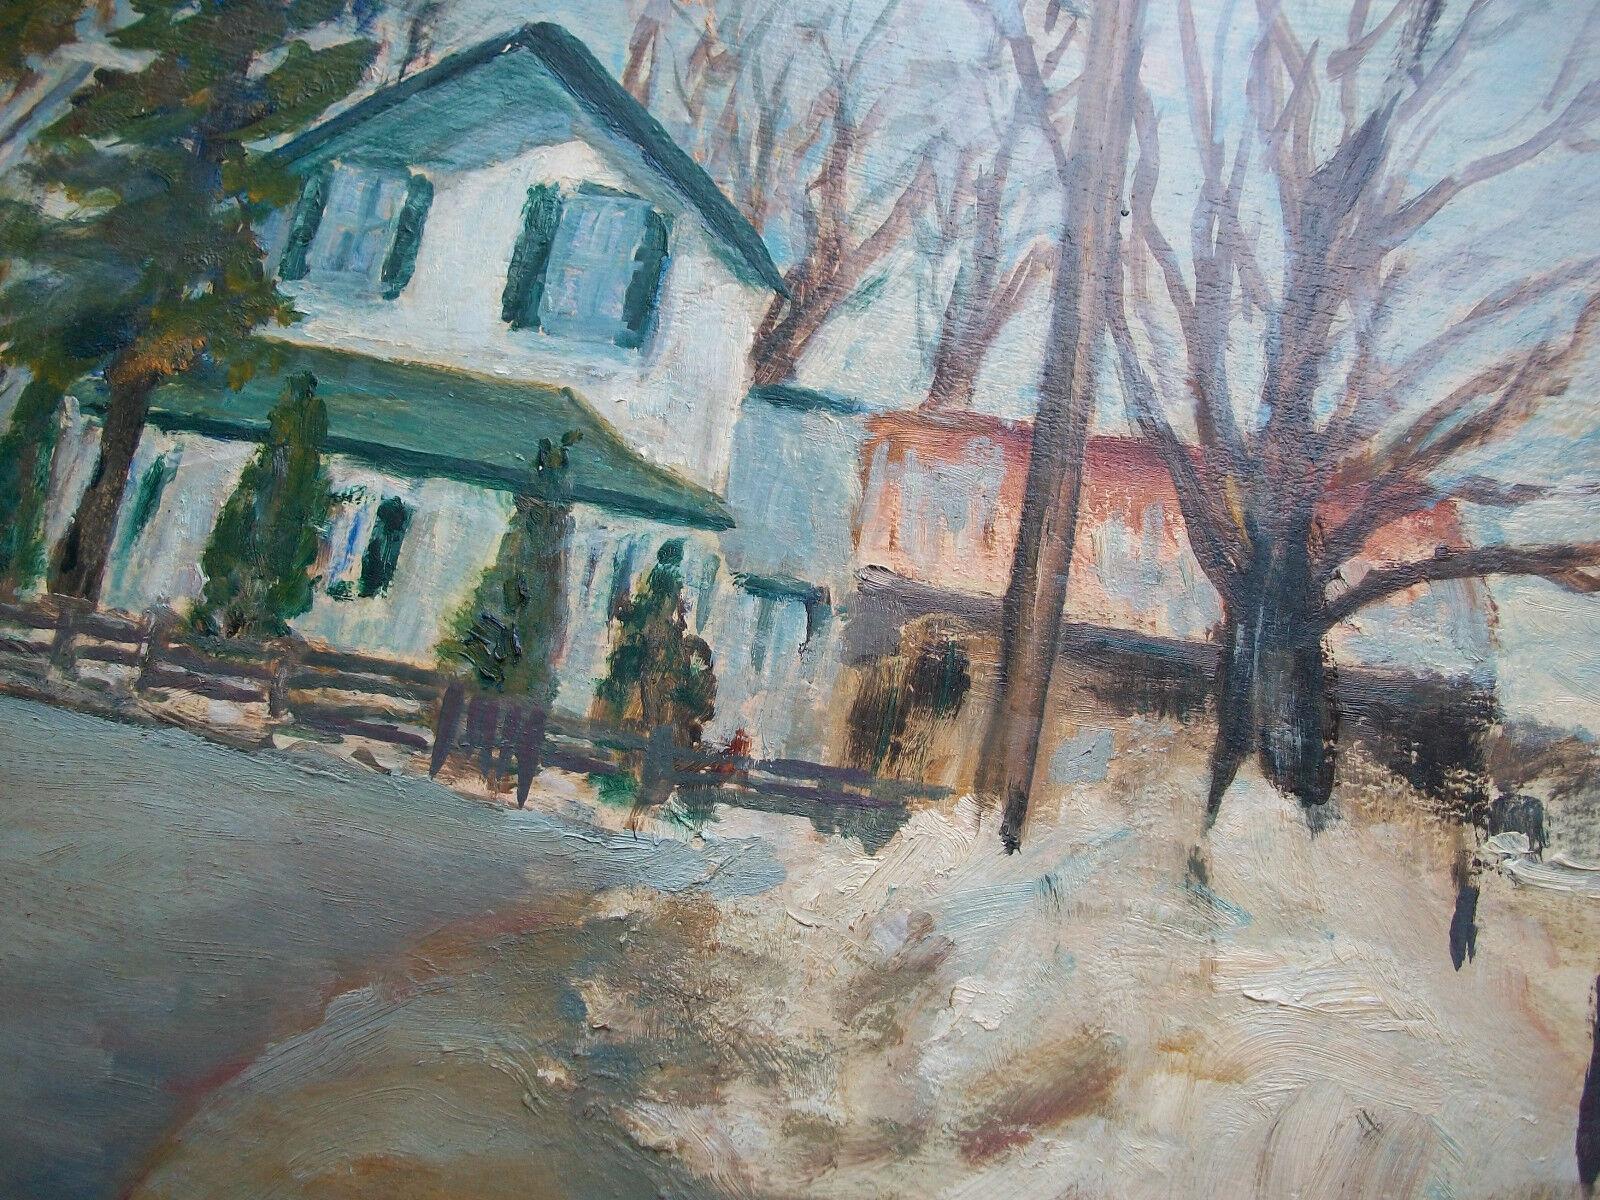 E. Simcoe - Vintage Impressionist style oil painting on panel - signed - unframed - Canada - mid 20th century.

Excellent vintage condition - very clean - no loss - no damage - no restoration - stain to the back of the Masonite panel (does not show